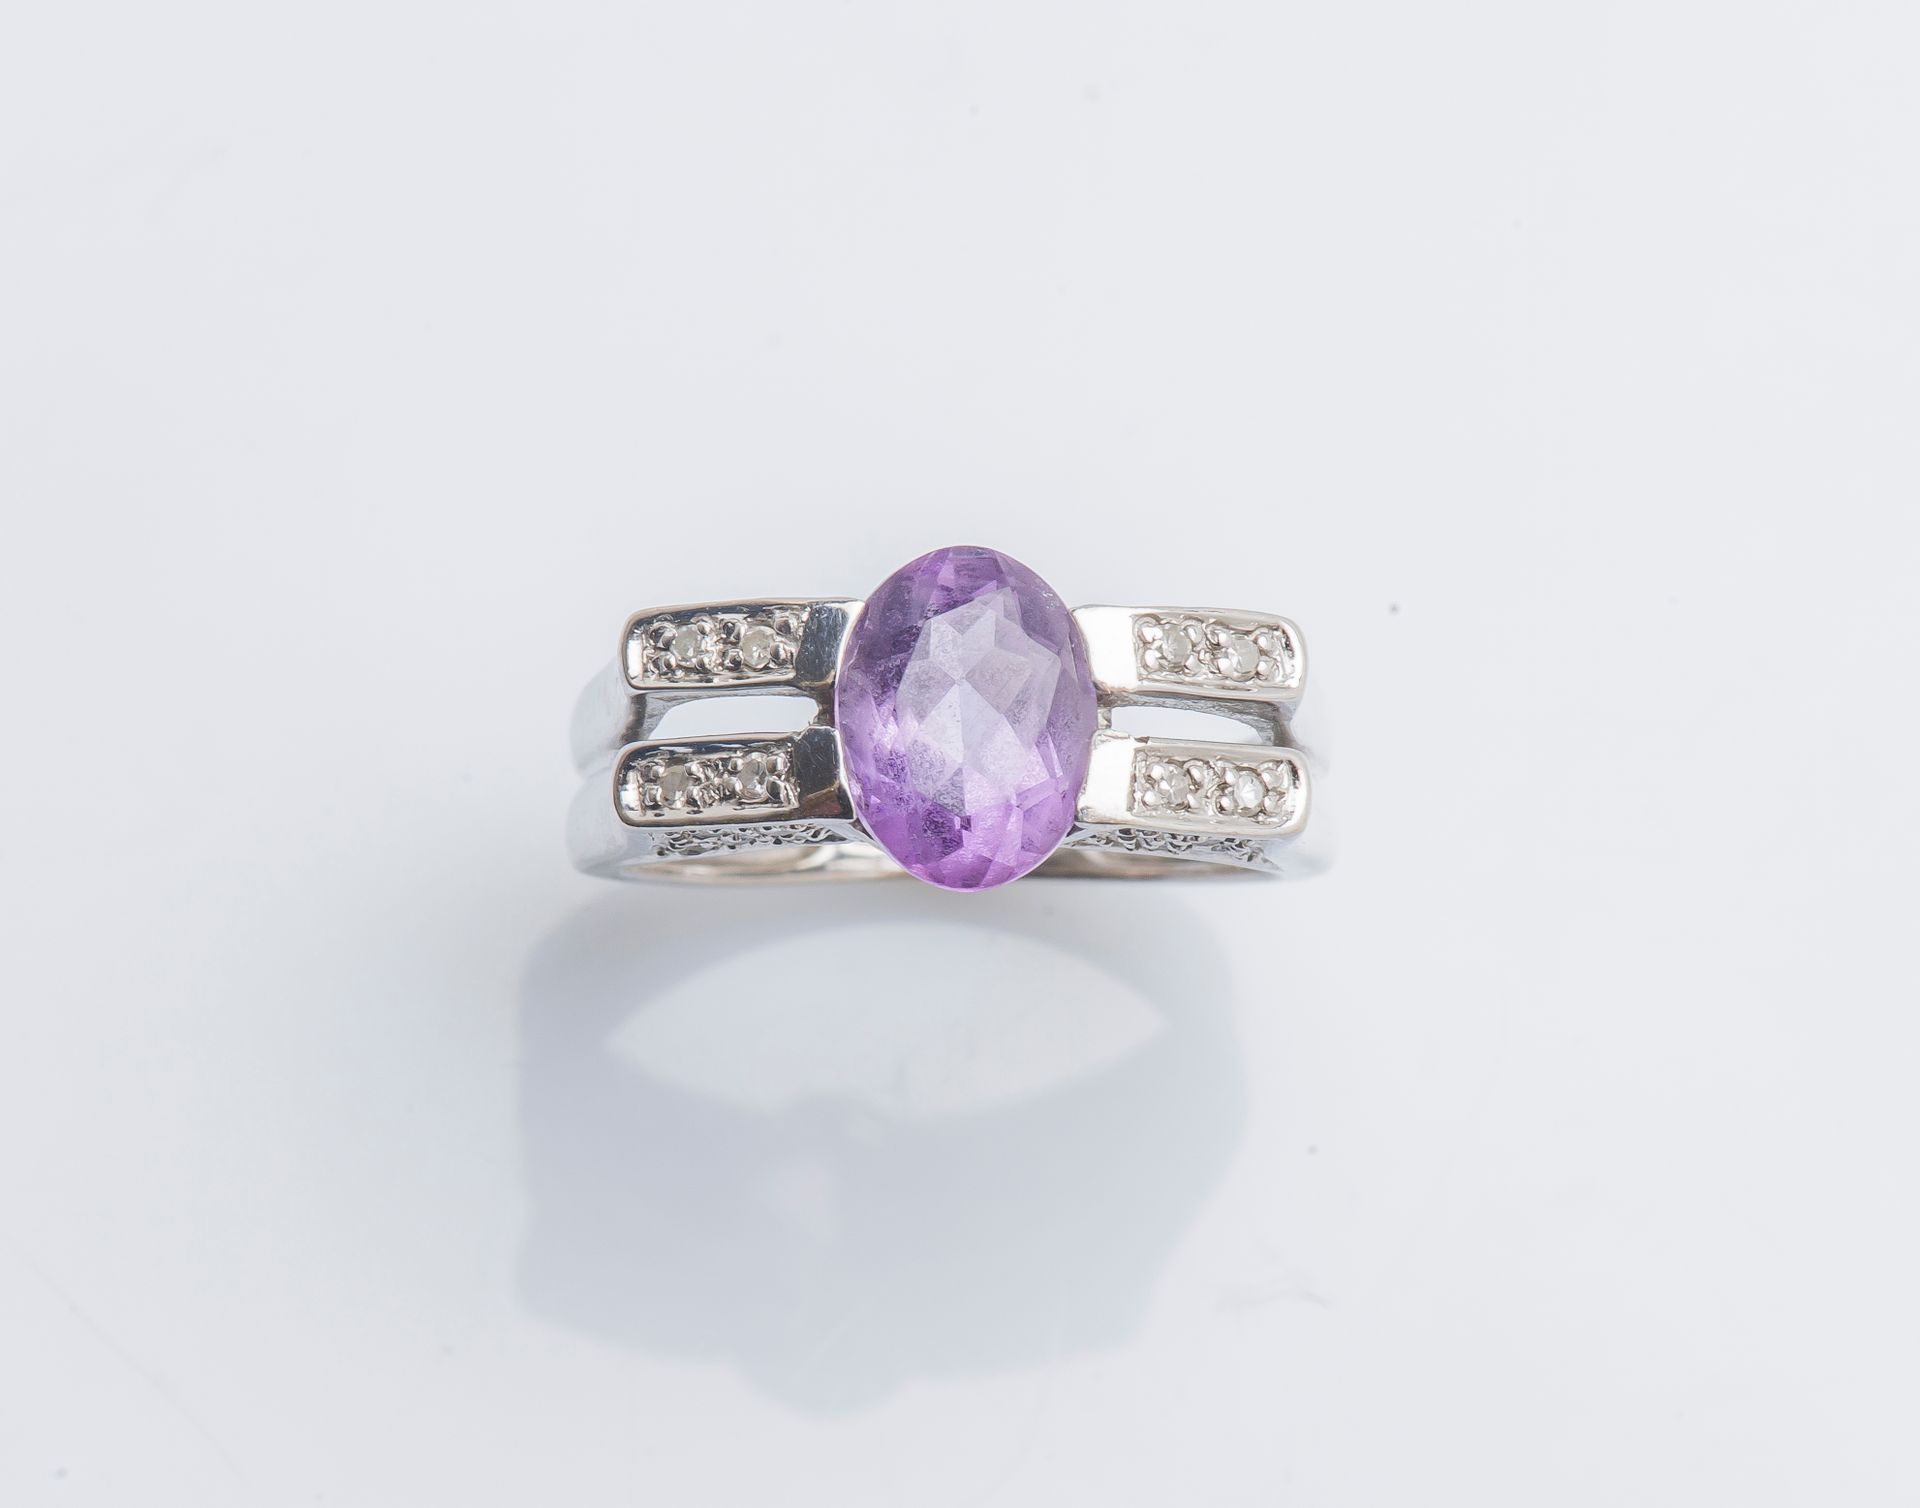 Null Ring in white gold 18 carats (750 thousandths) set with an oval amethyst su&hellip;